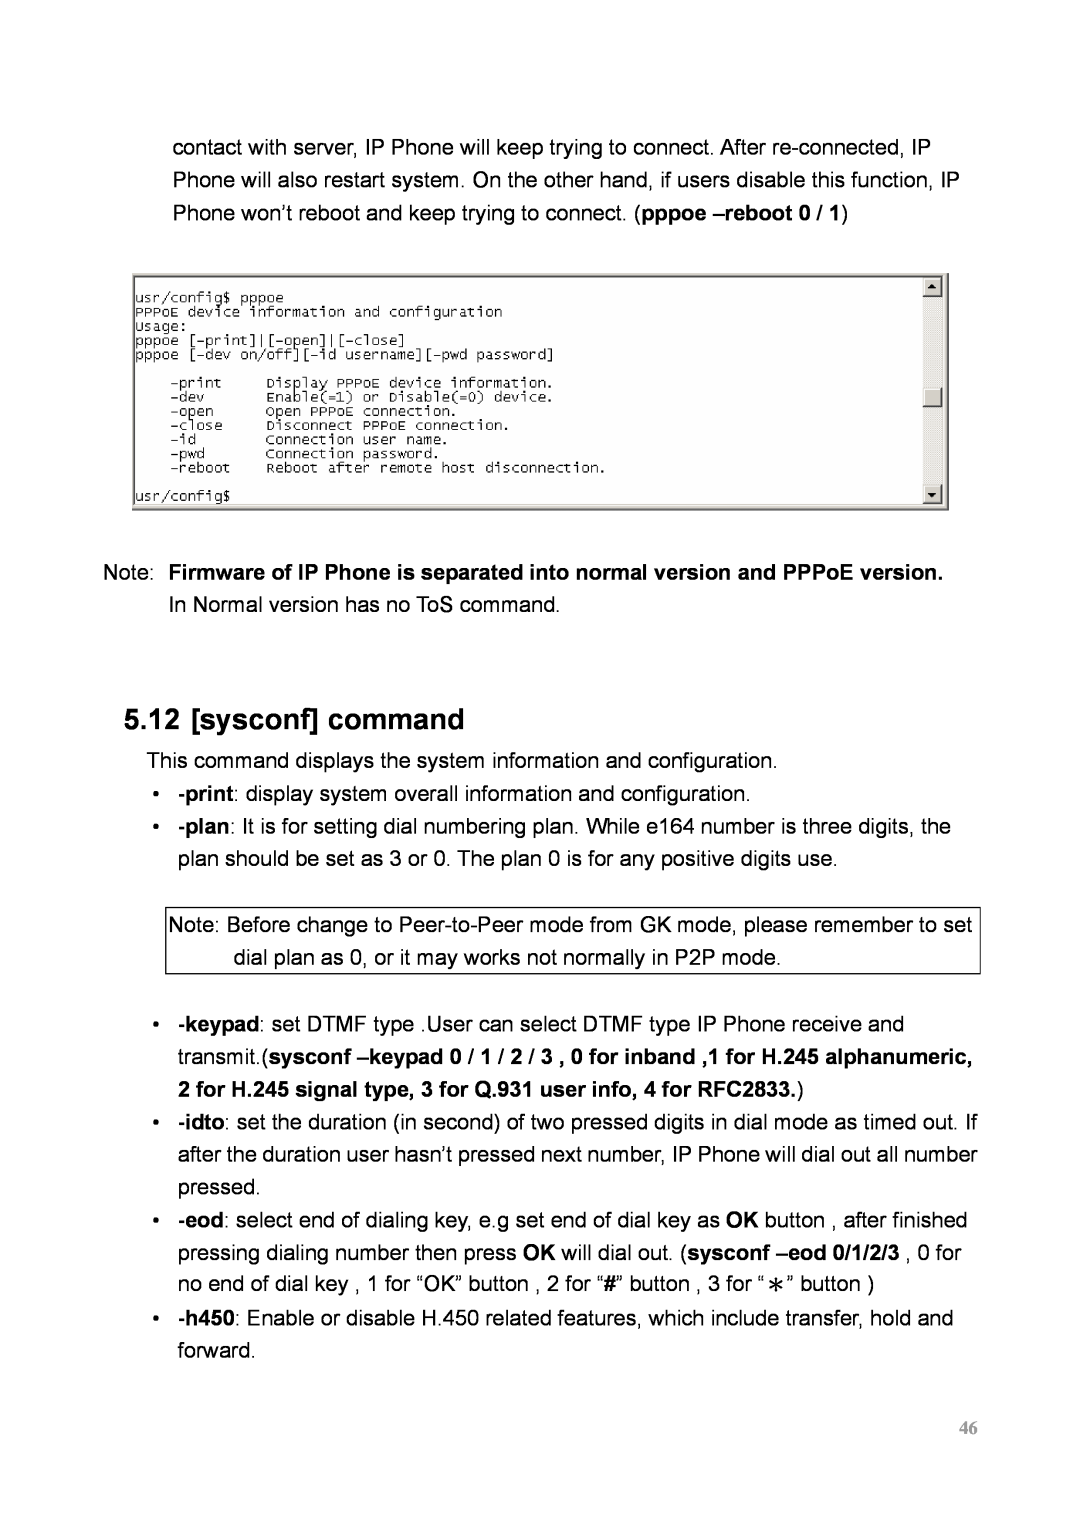 MicroNet Technology SP5100 user manual sysconf command 